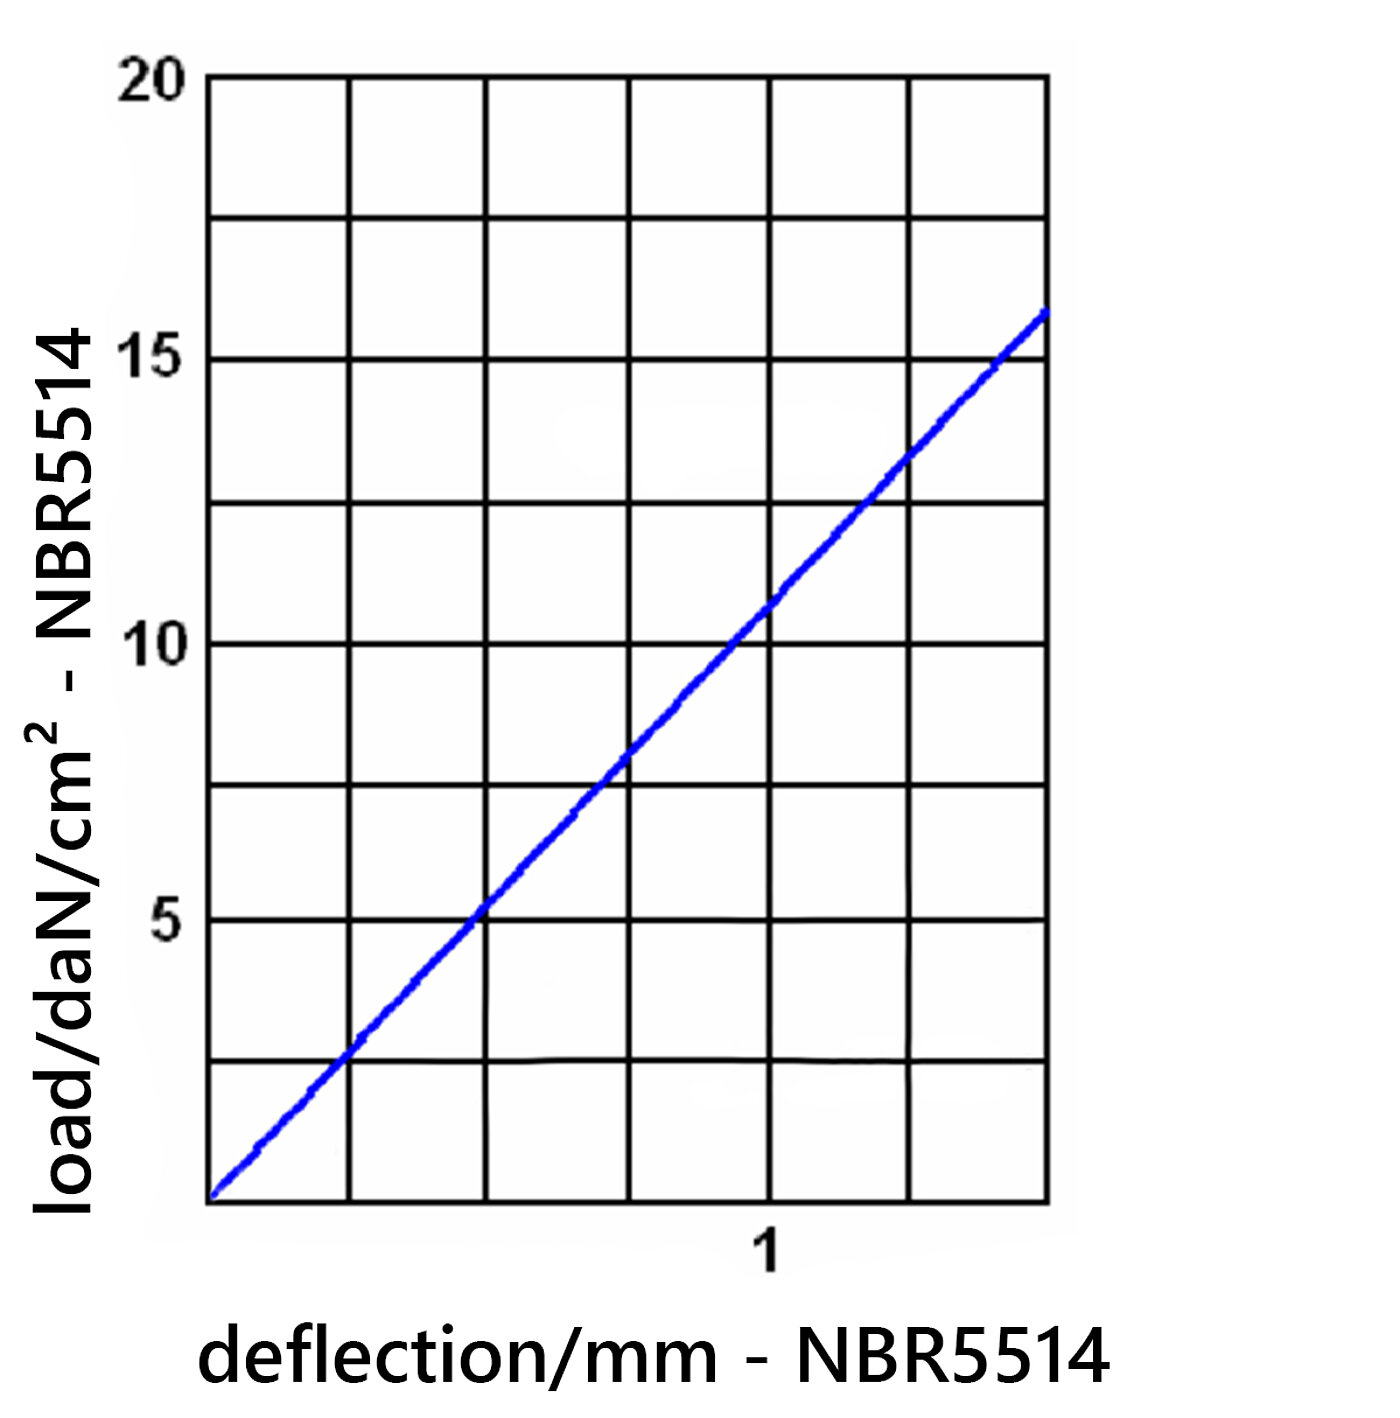 diagramme of the deflection of the elastomer board NBR5514 under load 